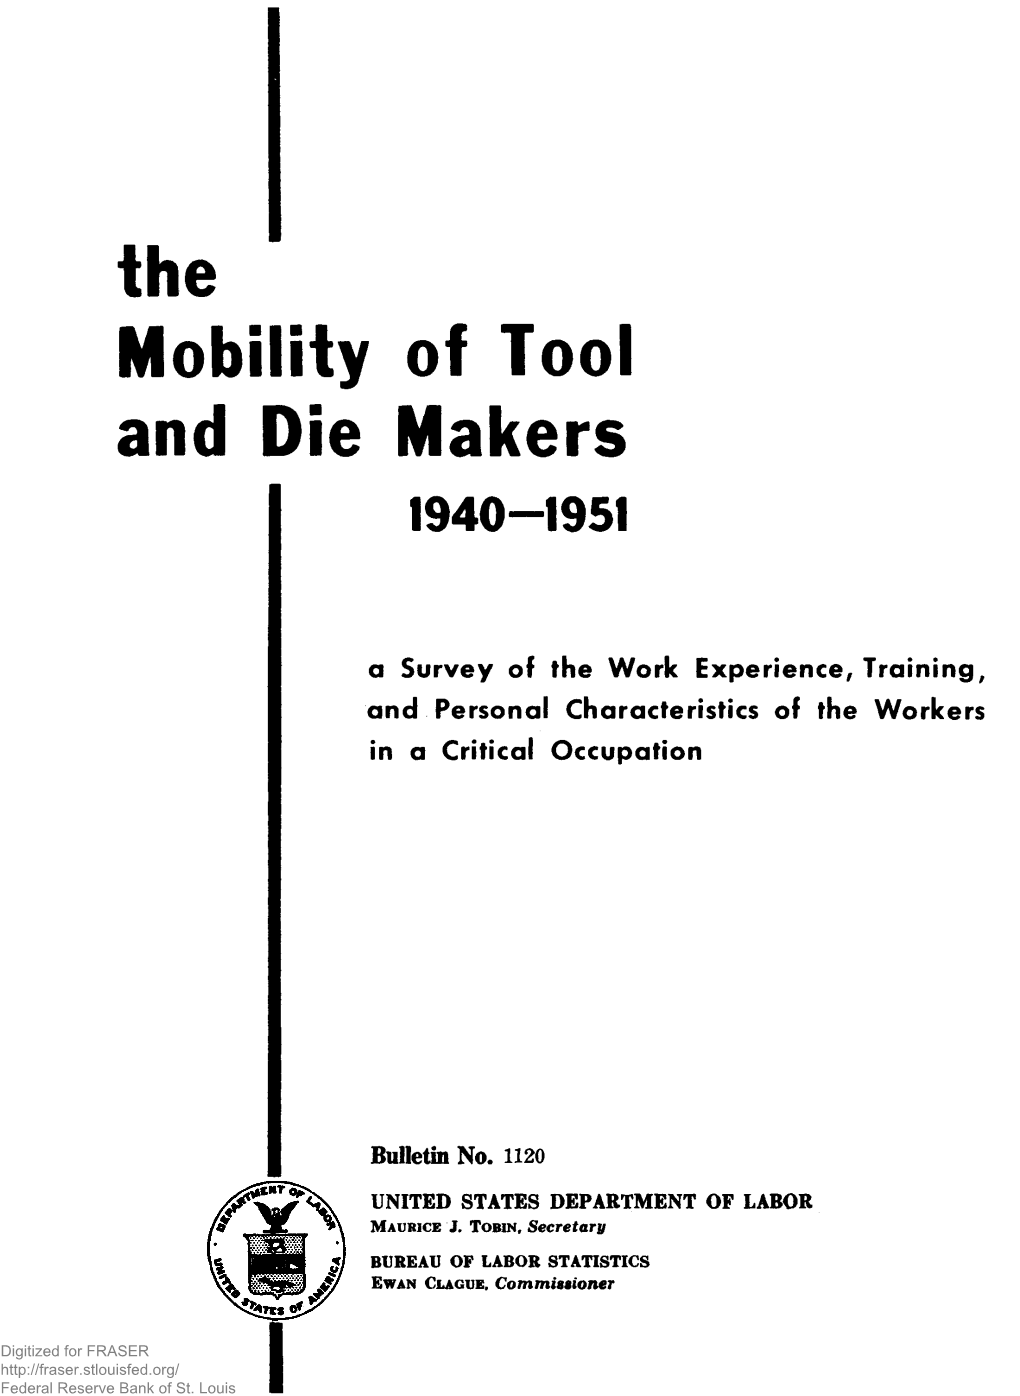 The Mobility of Tool and Die Makers, 1940-1951